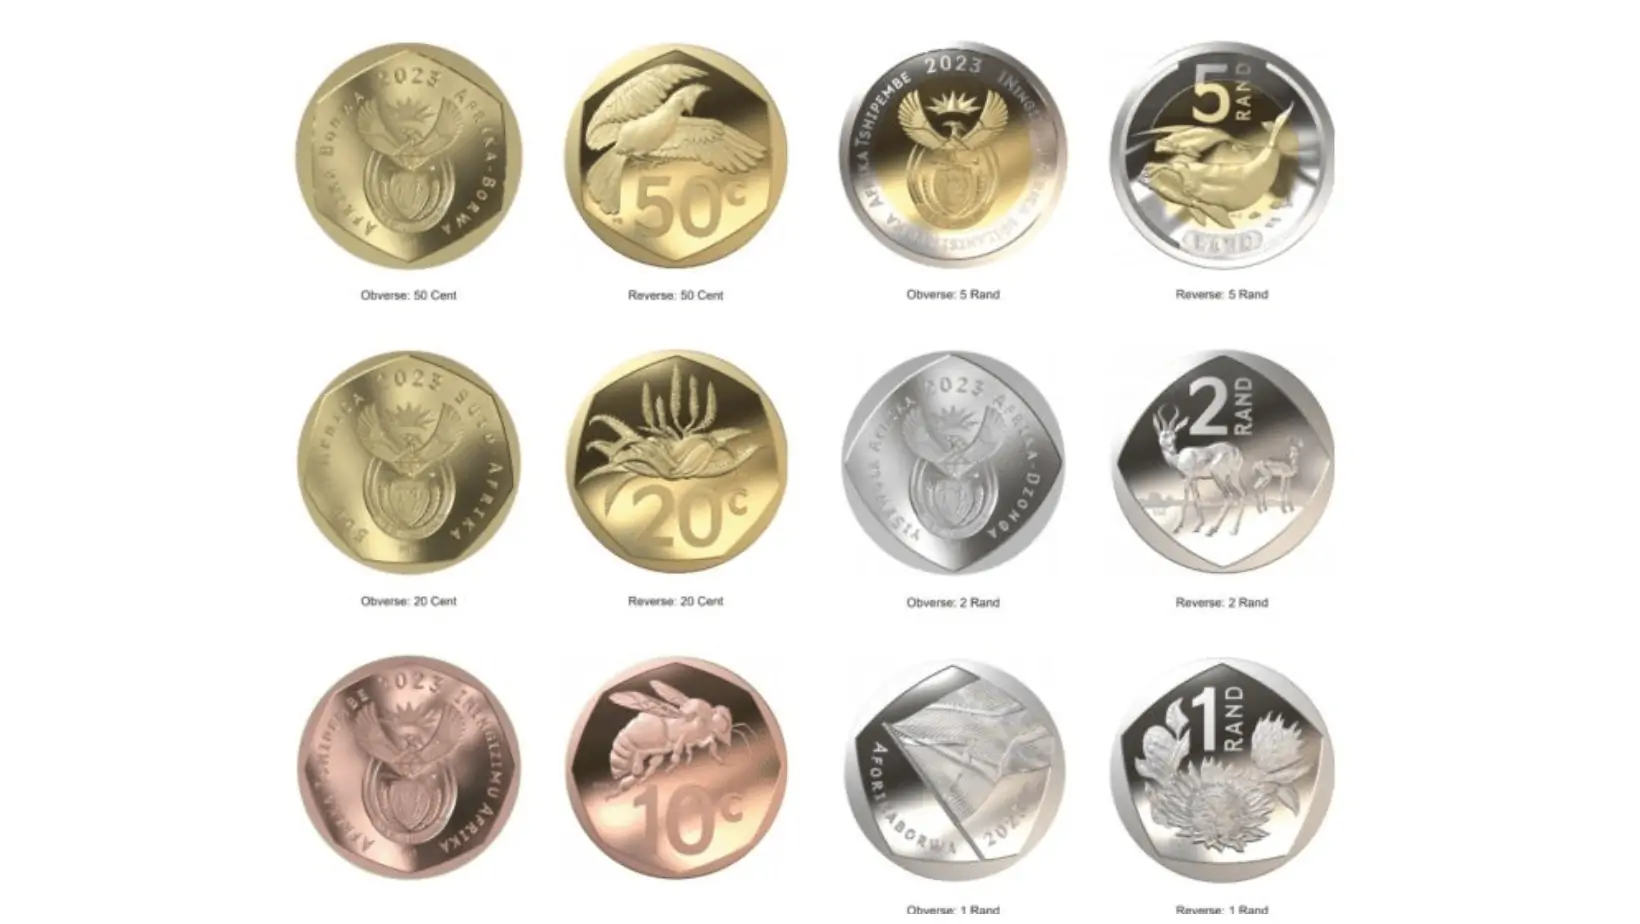 South Africa’s Natural Heritage Coins Unveiled